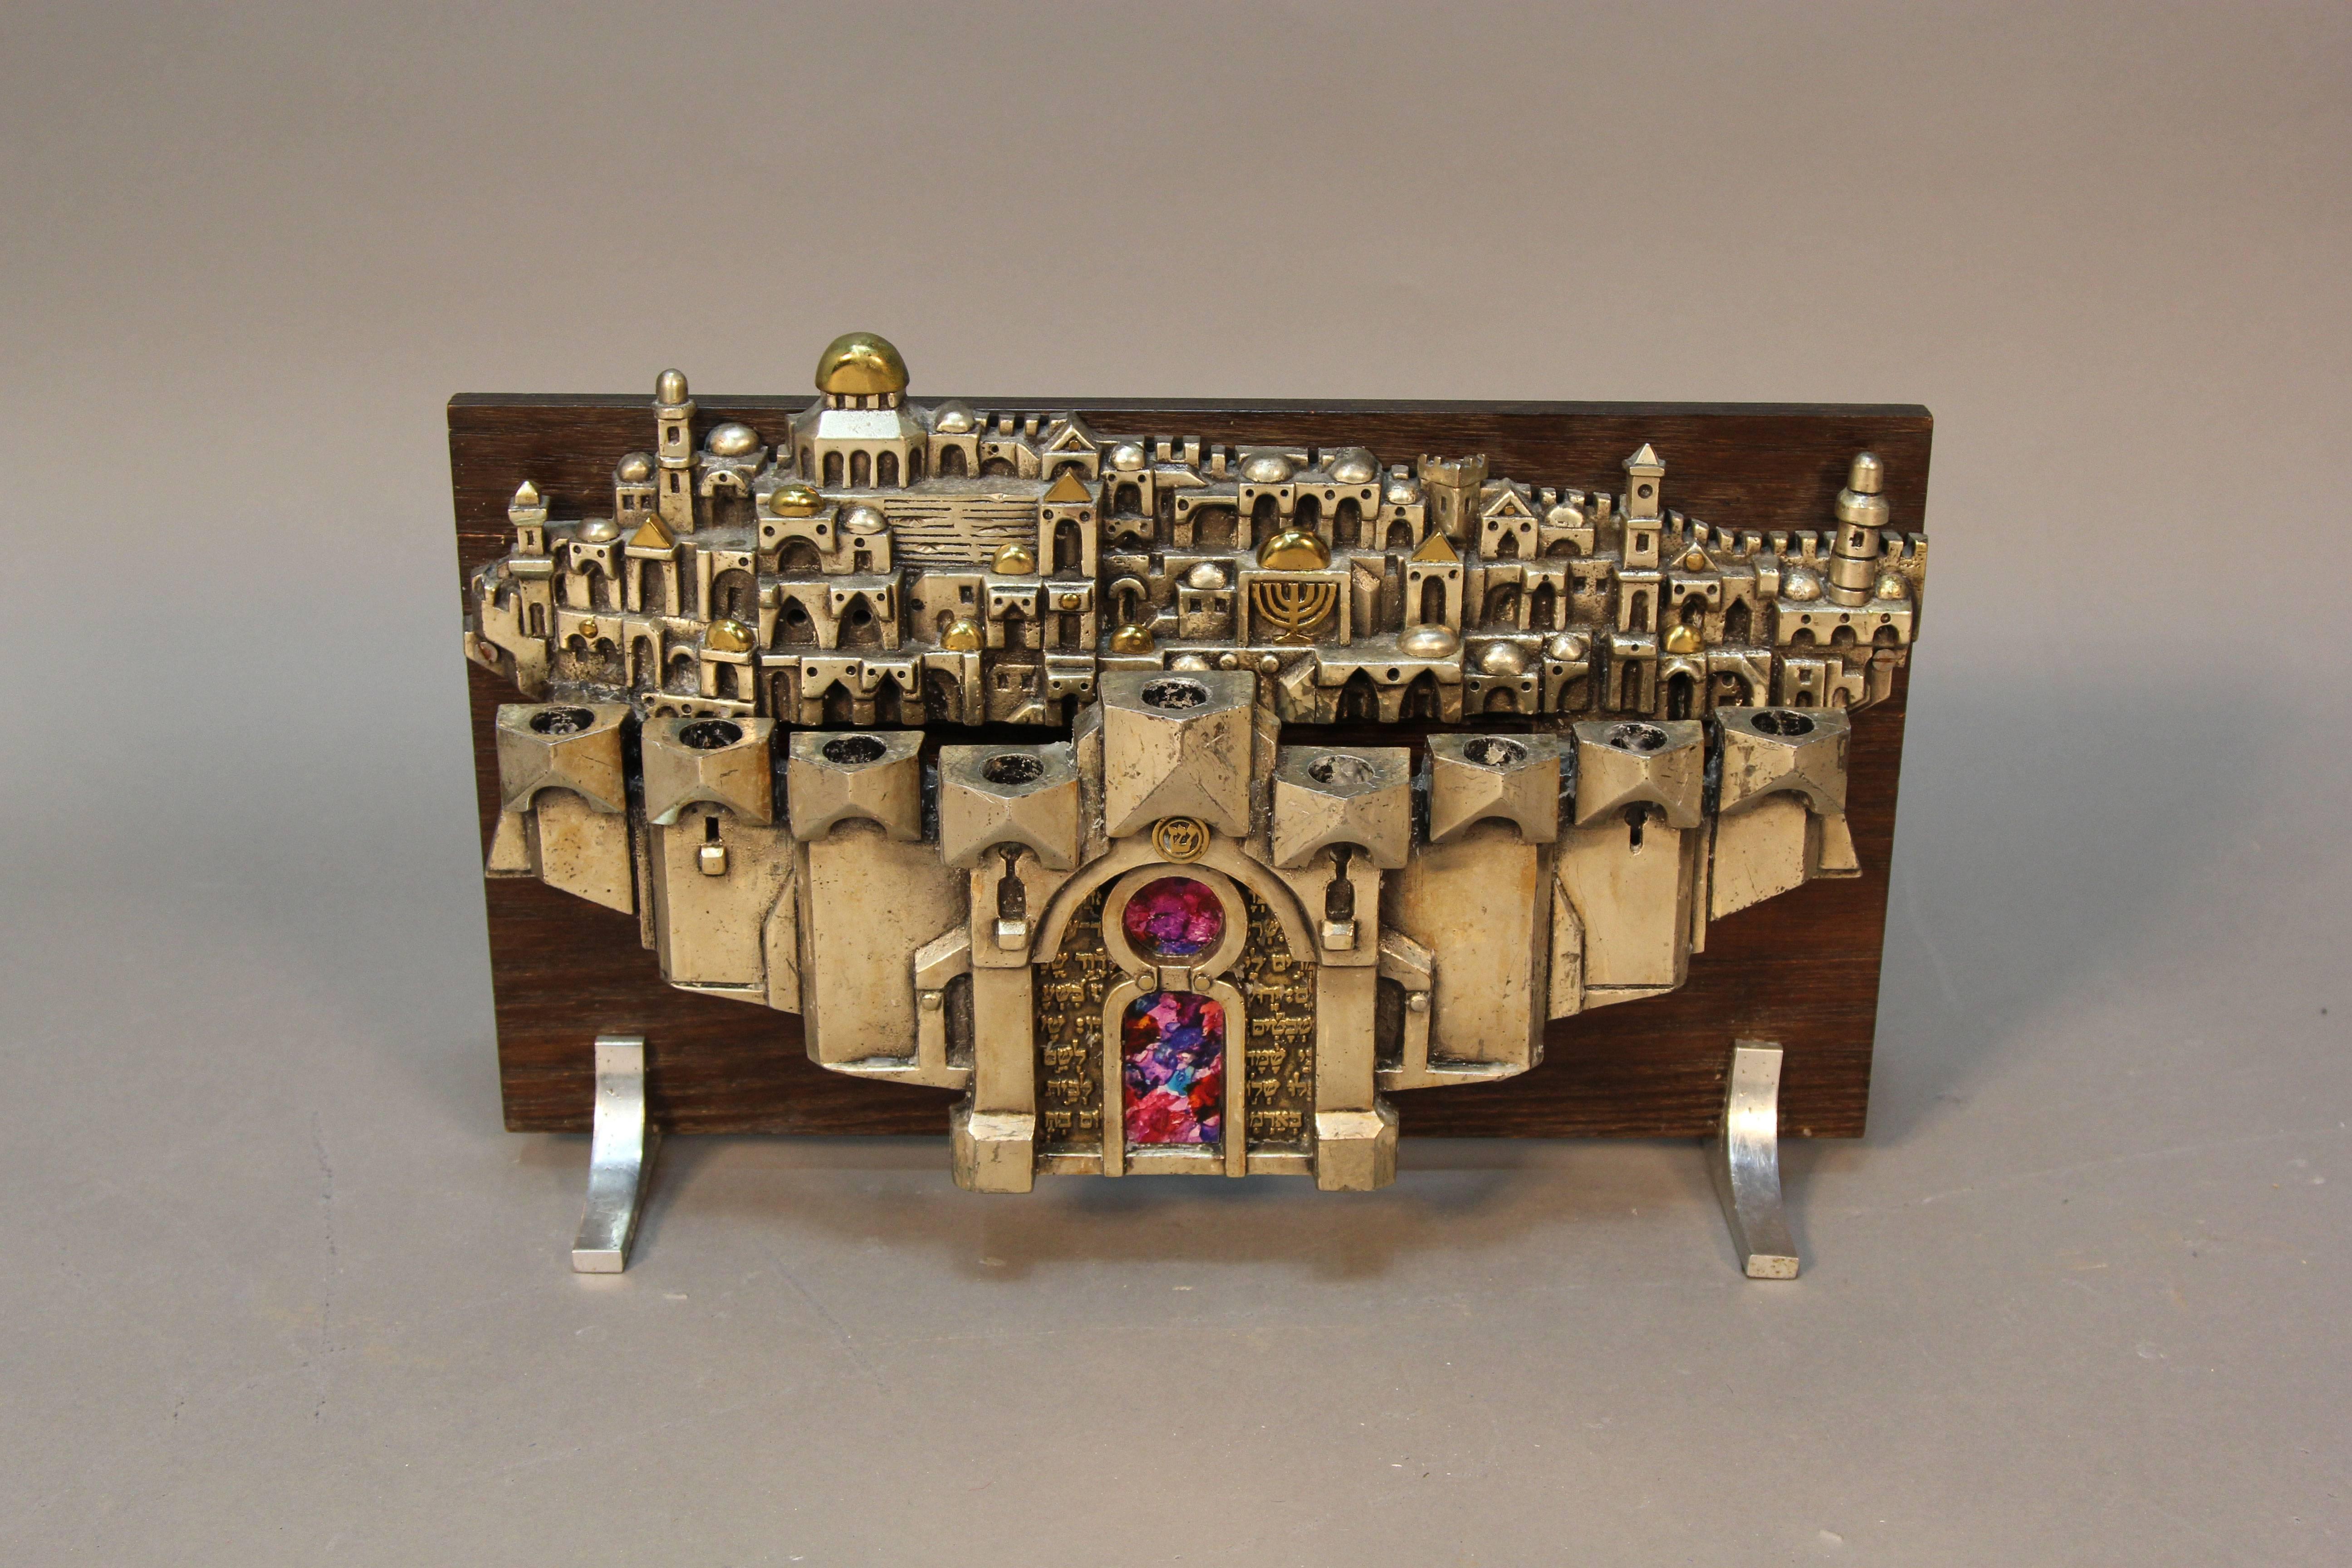 Artist signed Frank Meisler nine-branch Hannukah menorah sculpture. The sculpture features the hills and gates of Jerusalem and is sculpted of mixed metals and plated with gold and silver. Overall 19” wide and 12-3/4” high. Highly collectible art by